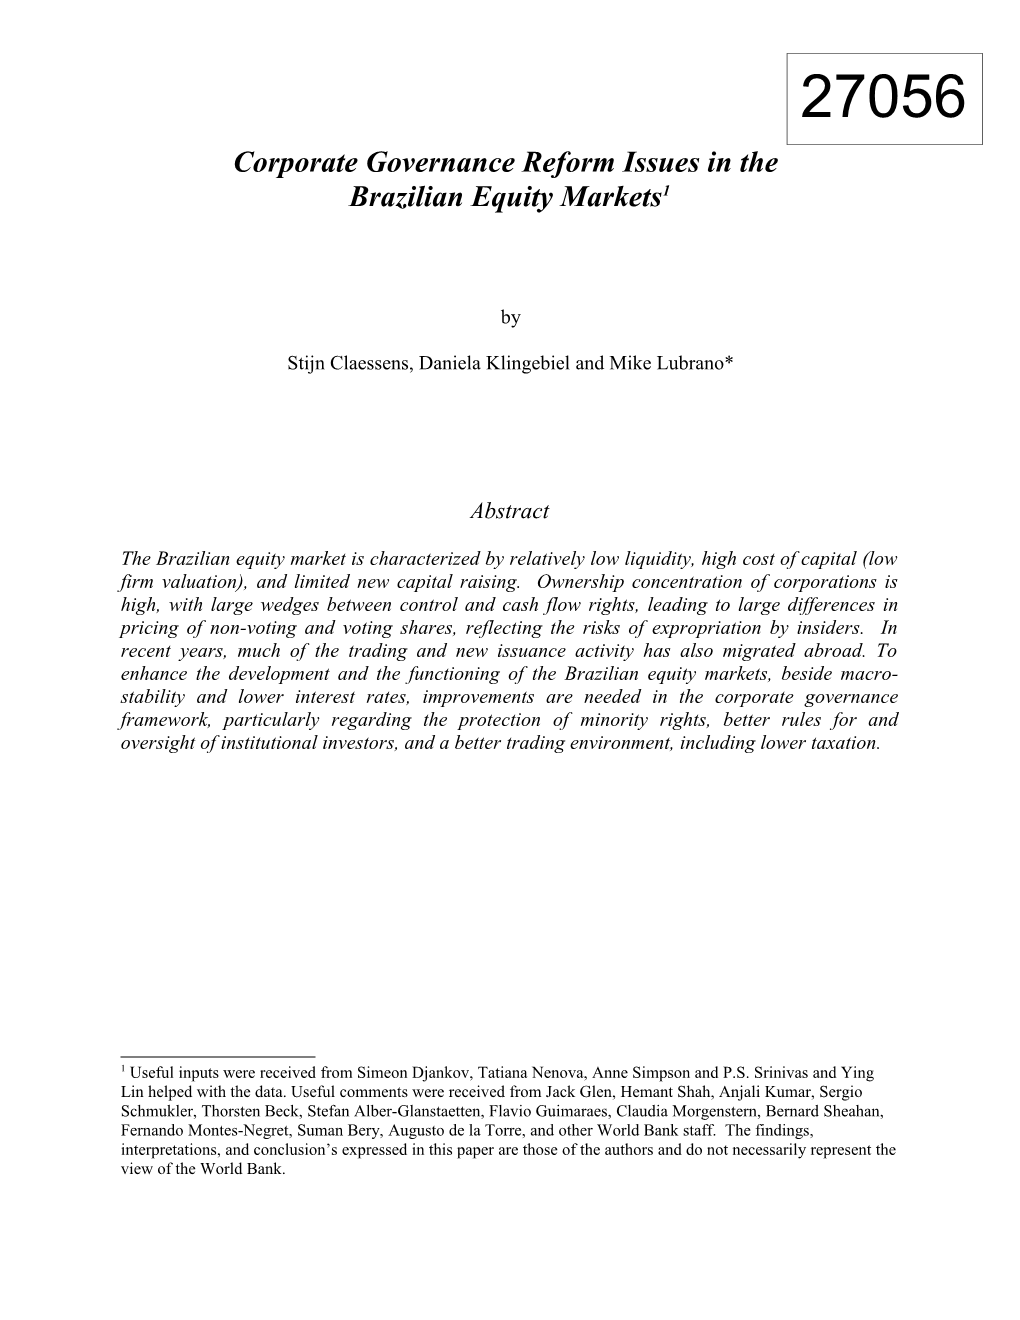 Outline for the Capital Markets Study for Brazil